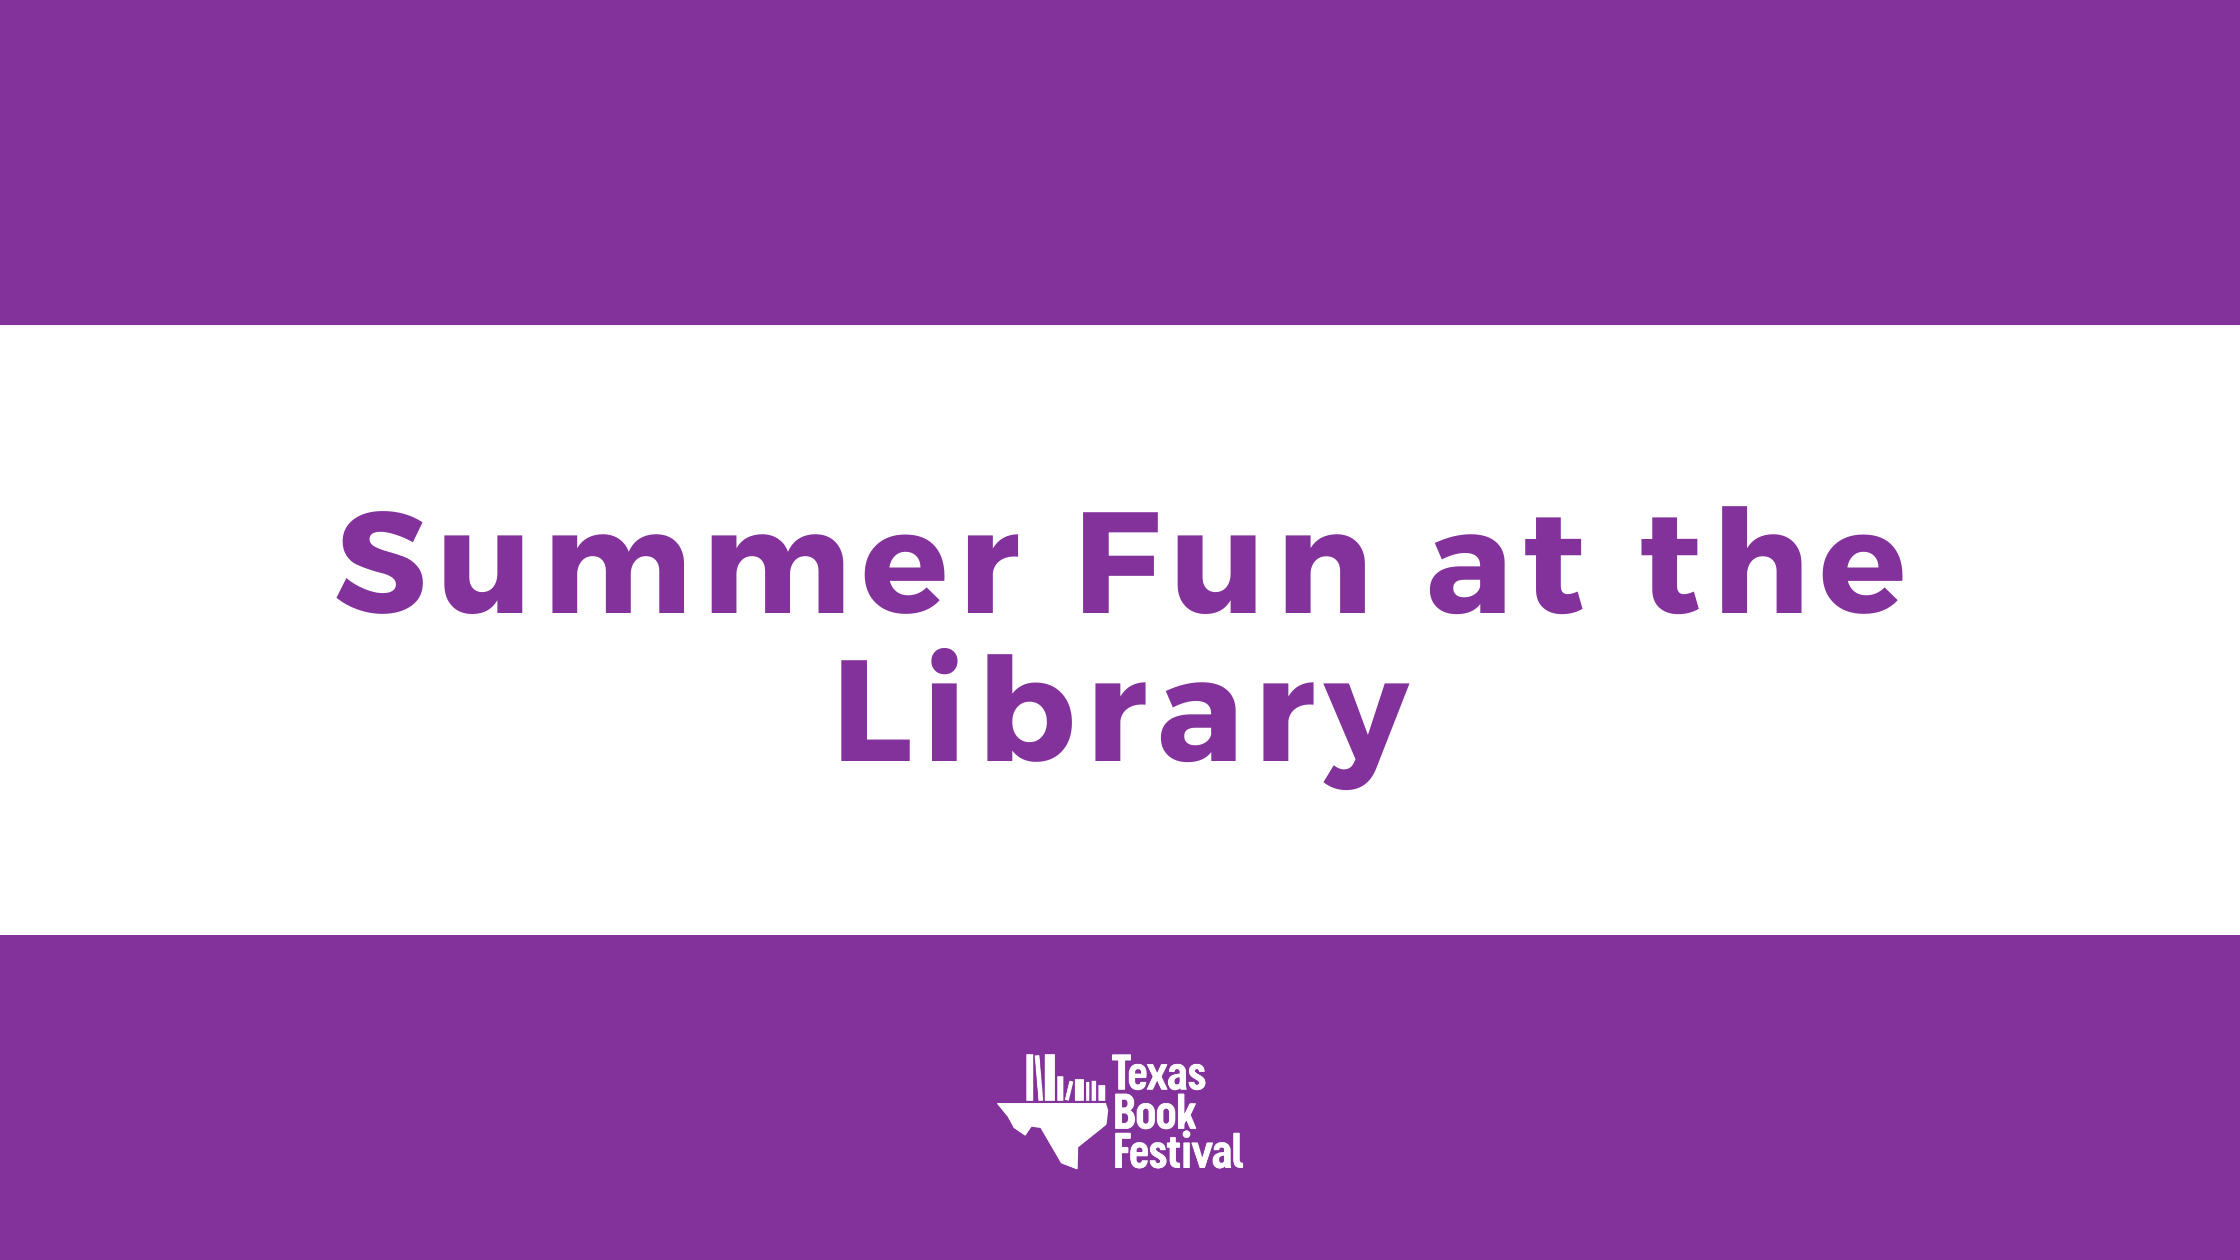 Summer fun at the library